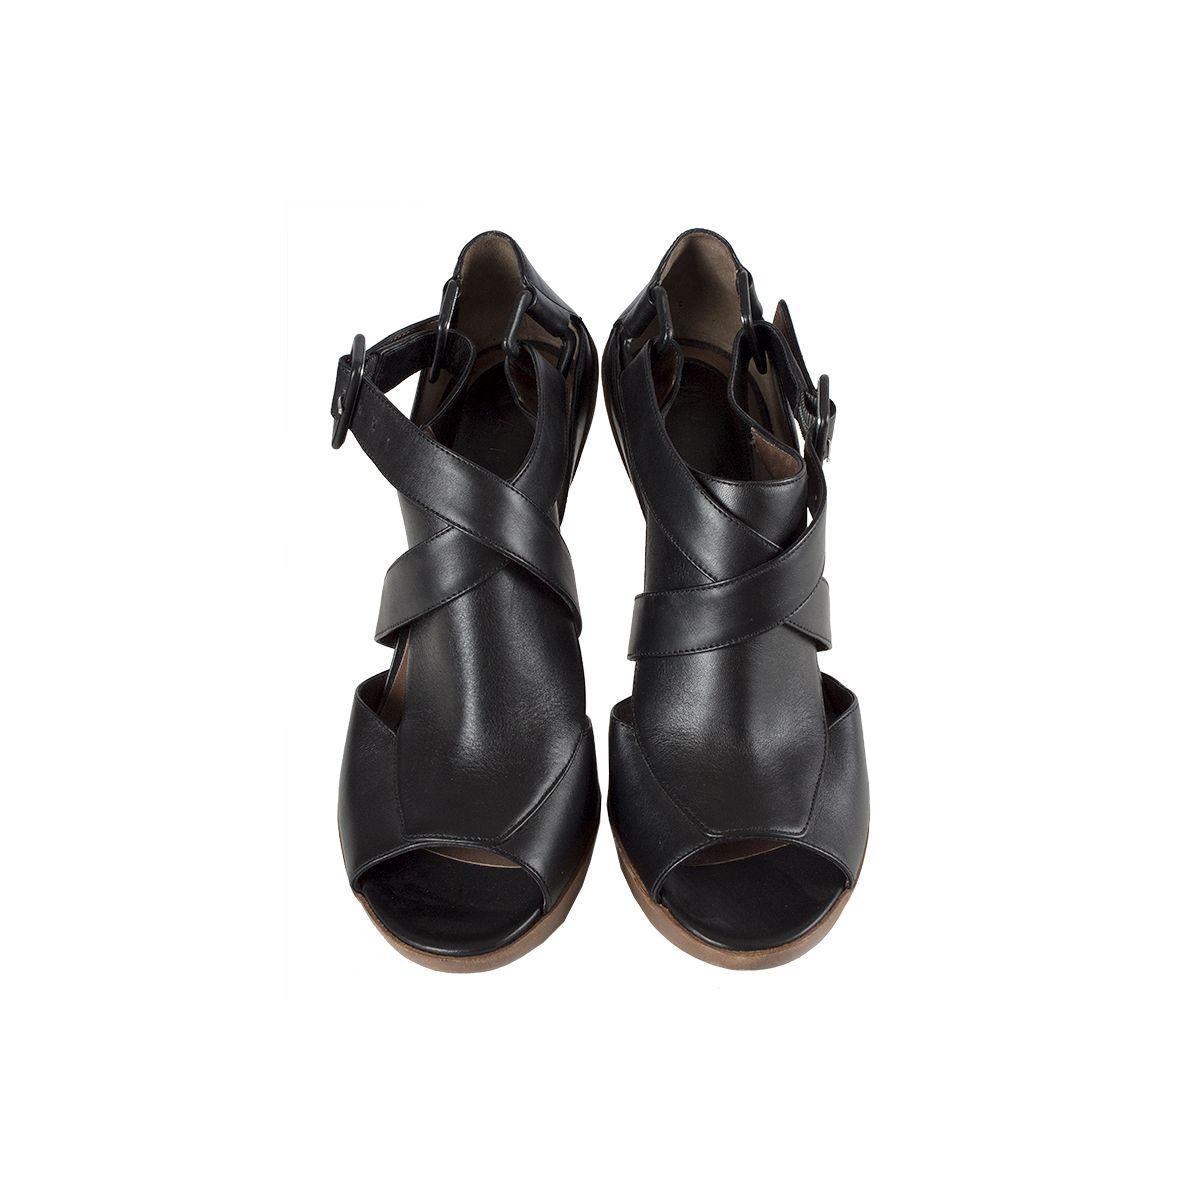 100% authentic Marni platform sandals in black leather with brown distressed leather. Rubber soles. Have been worn and are in excellent condition.

Imprinted Size	39
Shoe Size	39
Inside Sole	26cm (10.1in)
Width	8cm (3.1in)
Heel	13cm